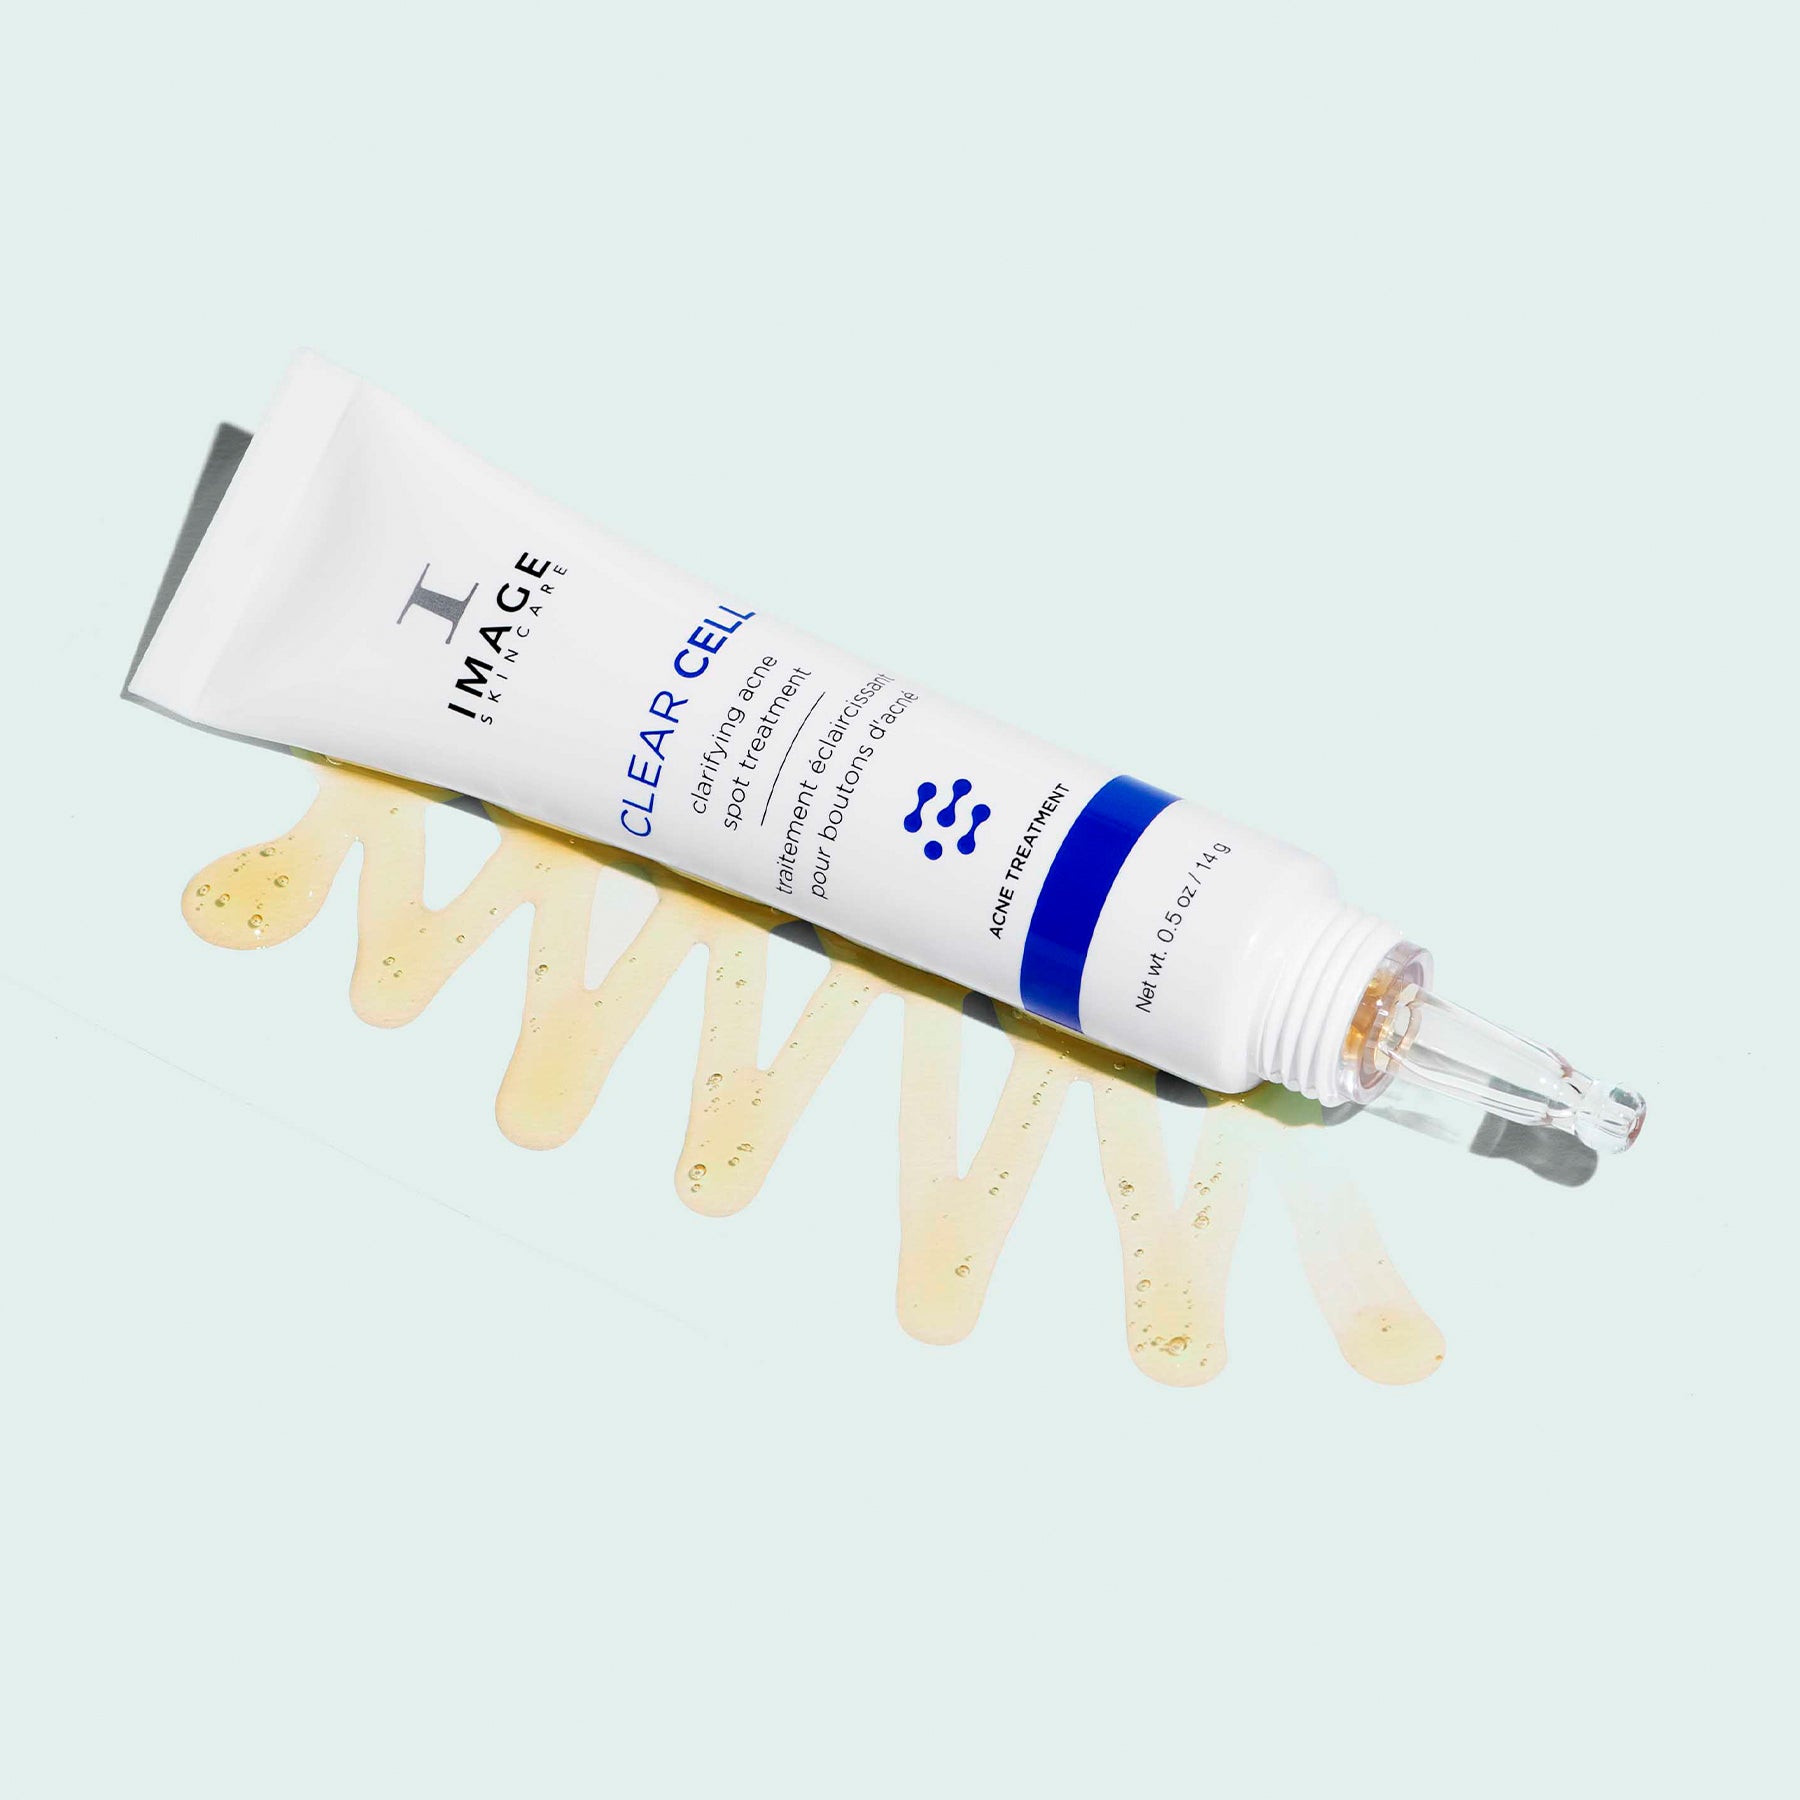 Clarifying acne spot treatment tube laying on its side